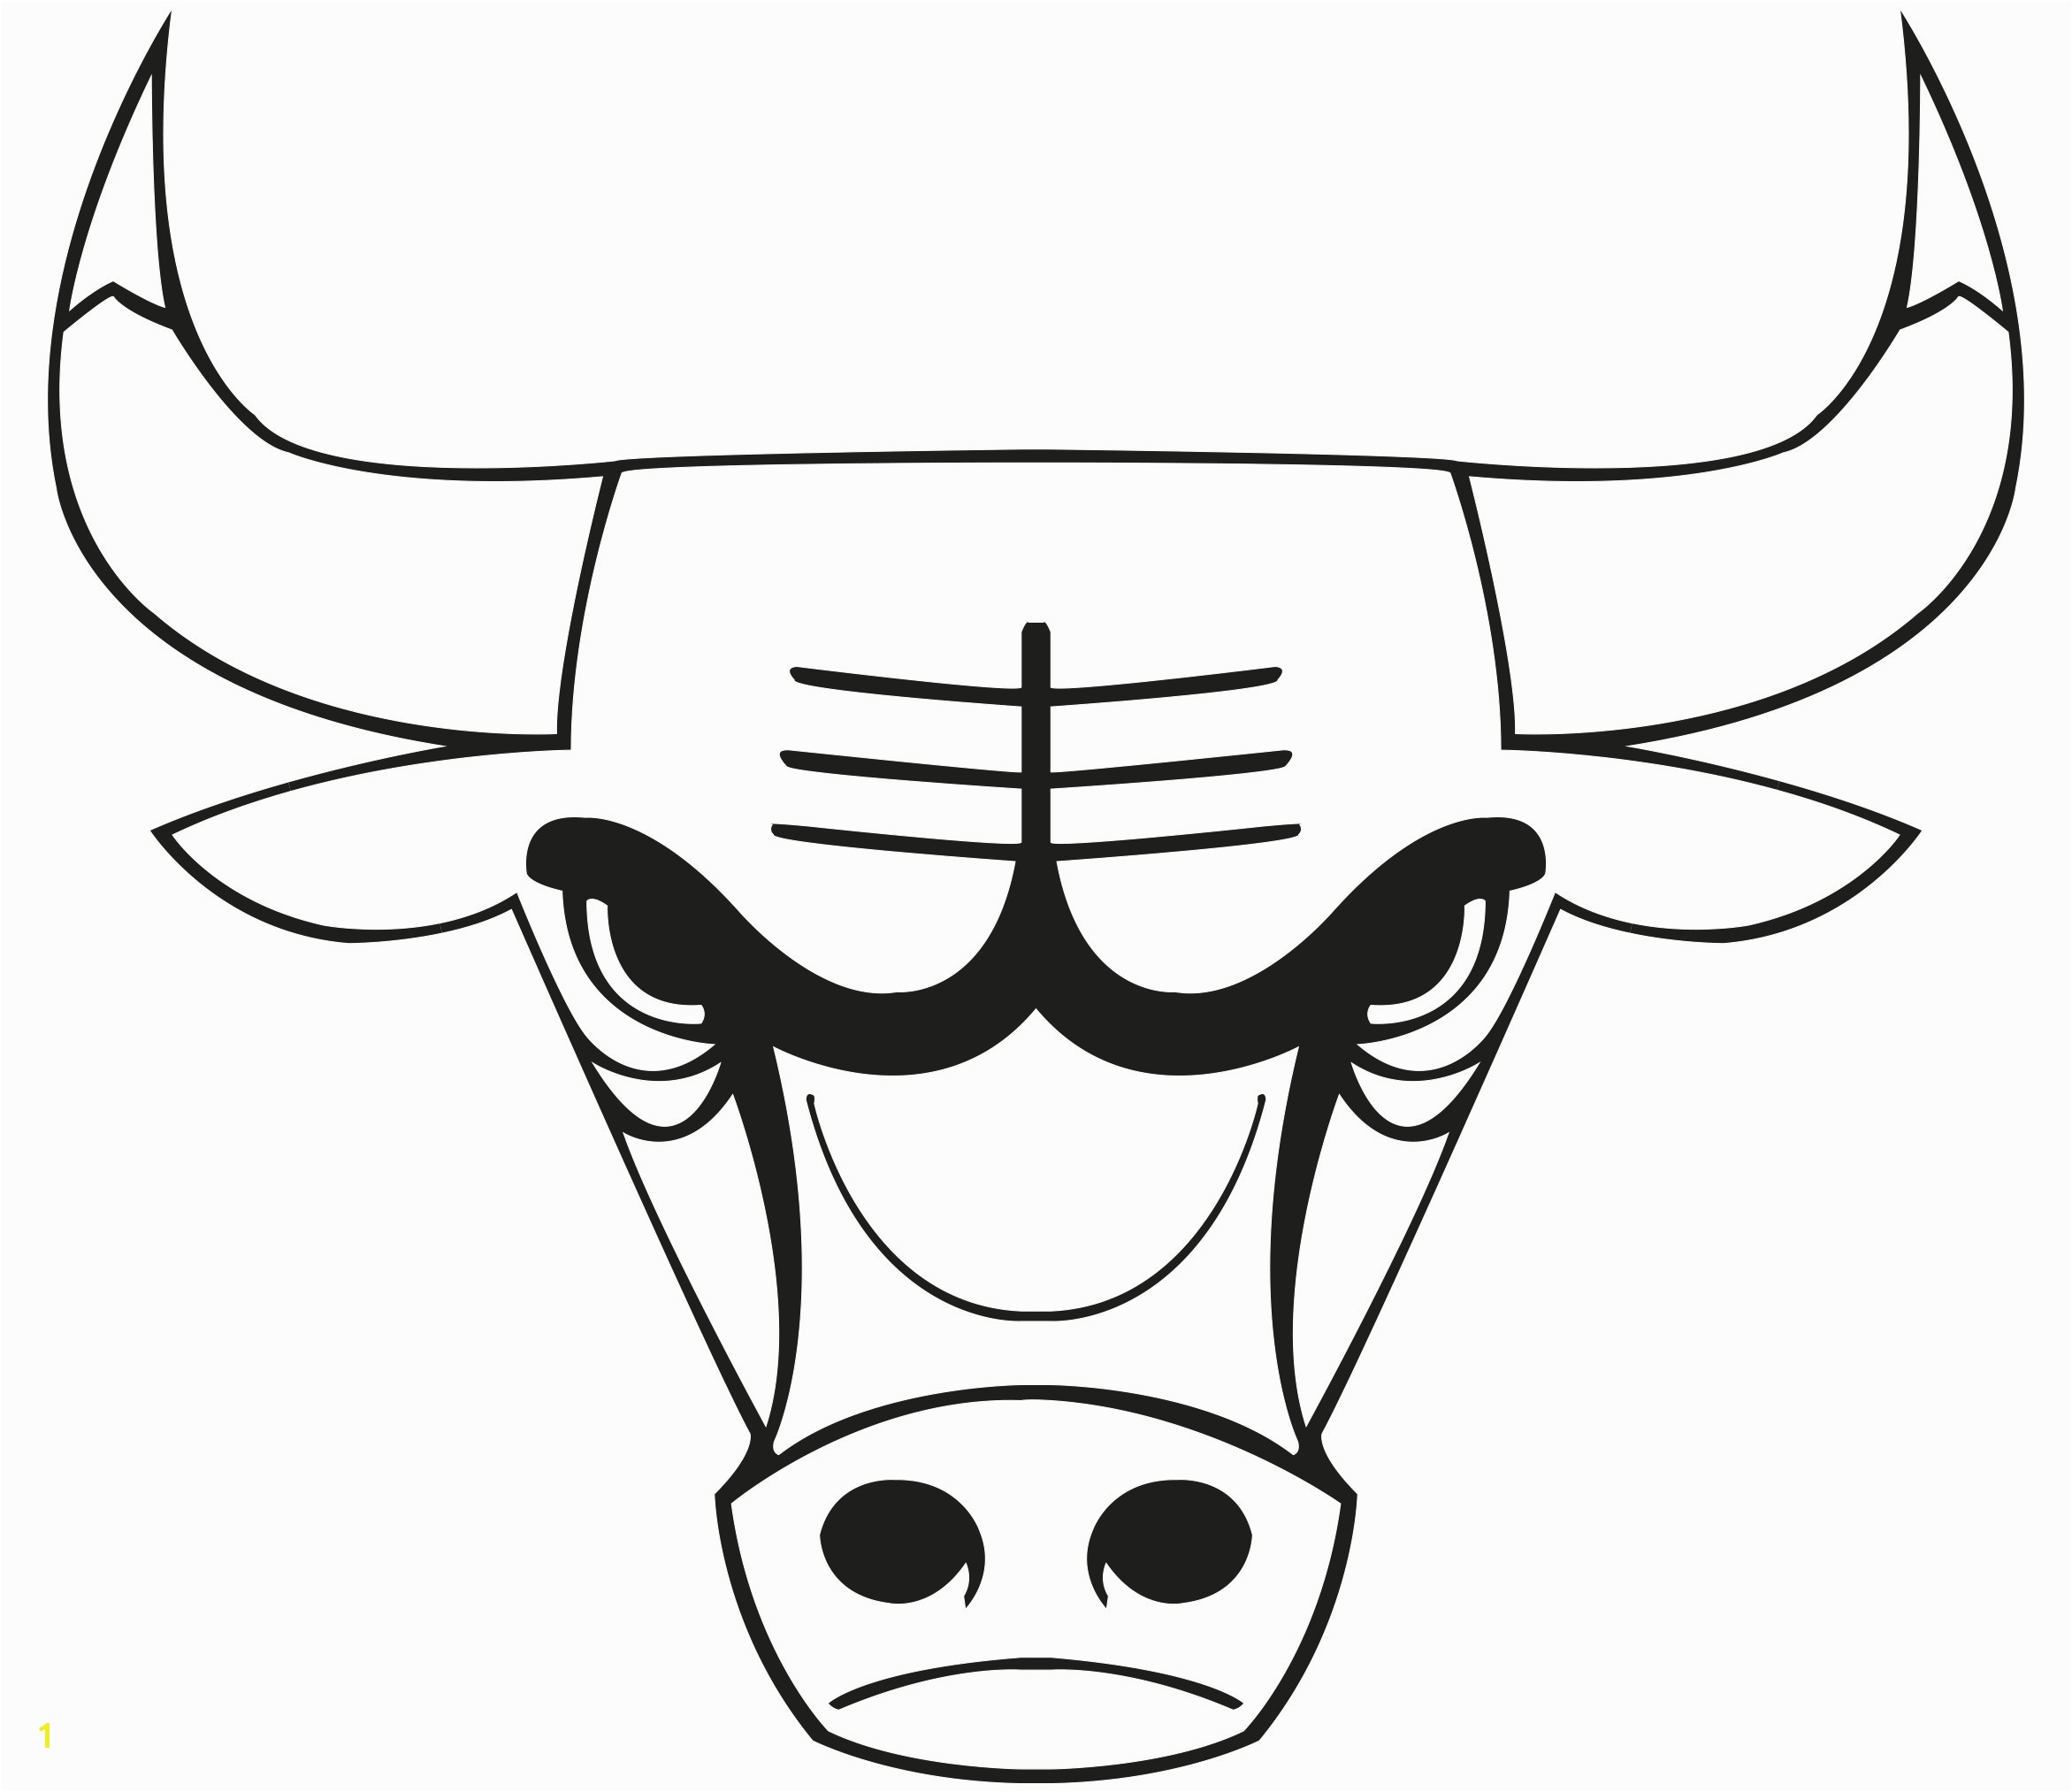 Bull Head Coloring Page Chicago Bulls Coloring Pages Printable In Cure Page Draw 2 Bull to